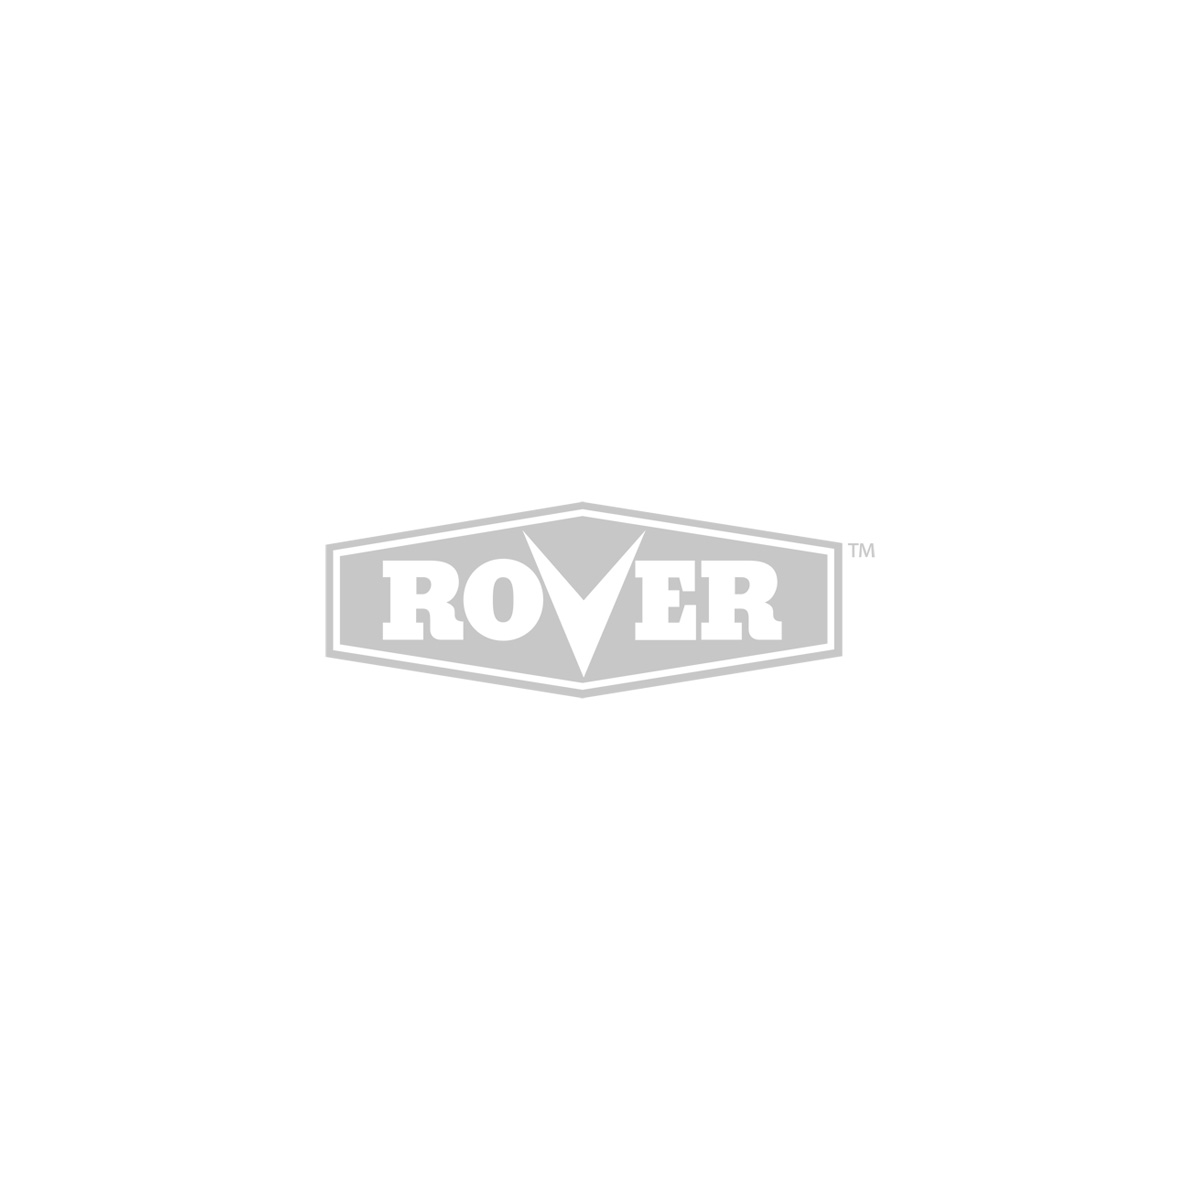 Rover Range Overview